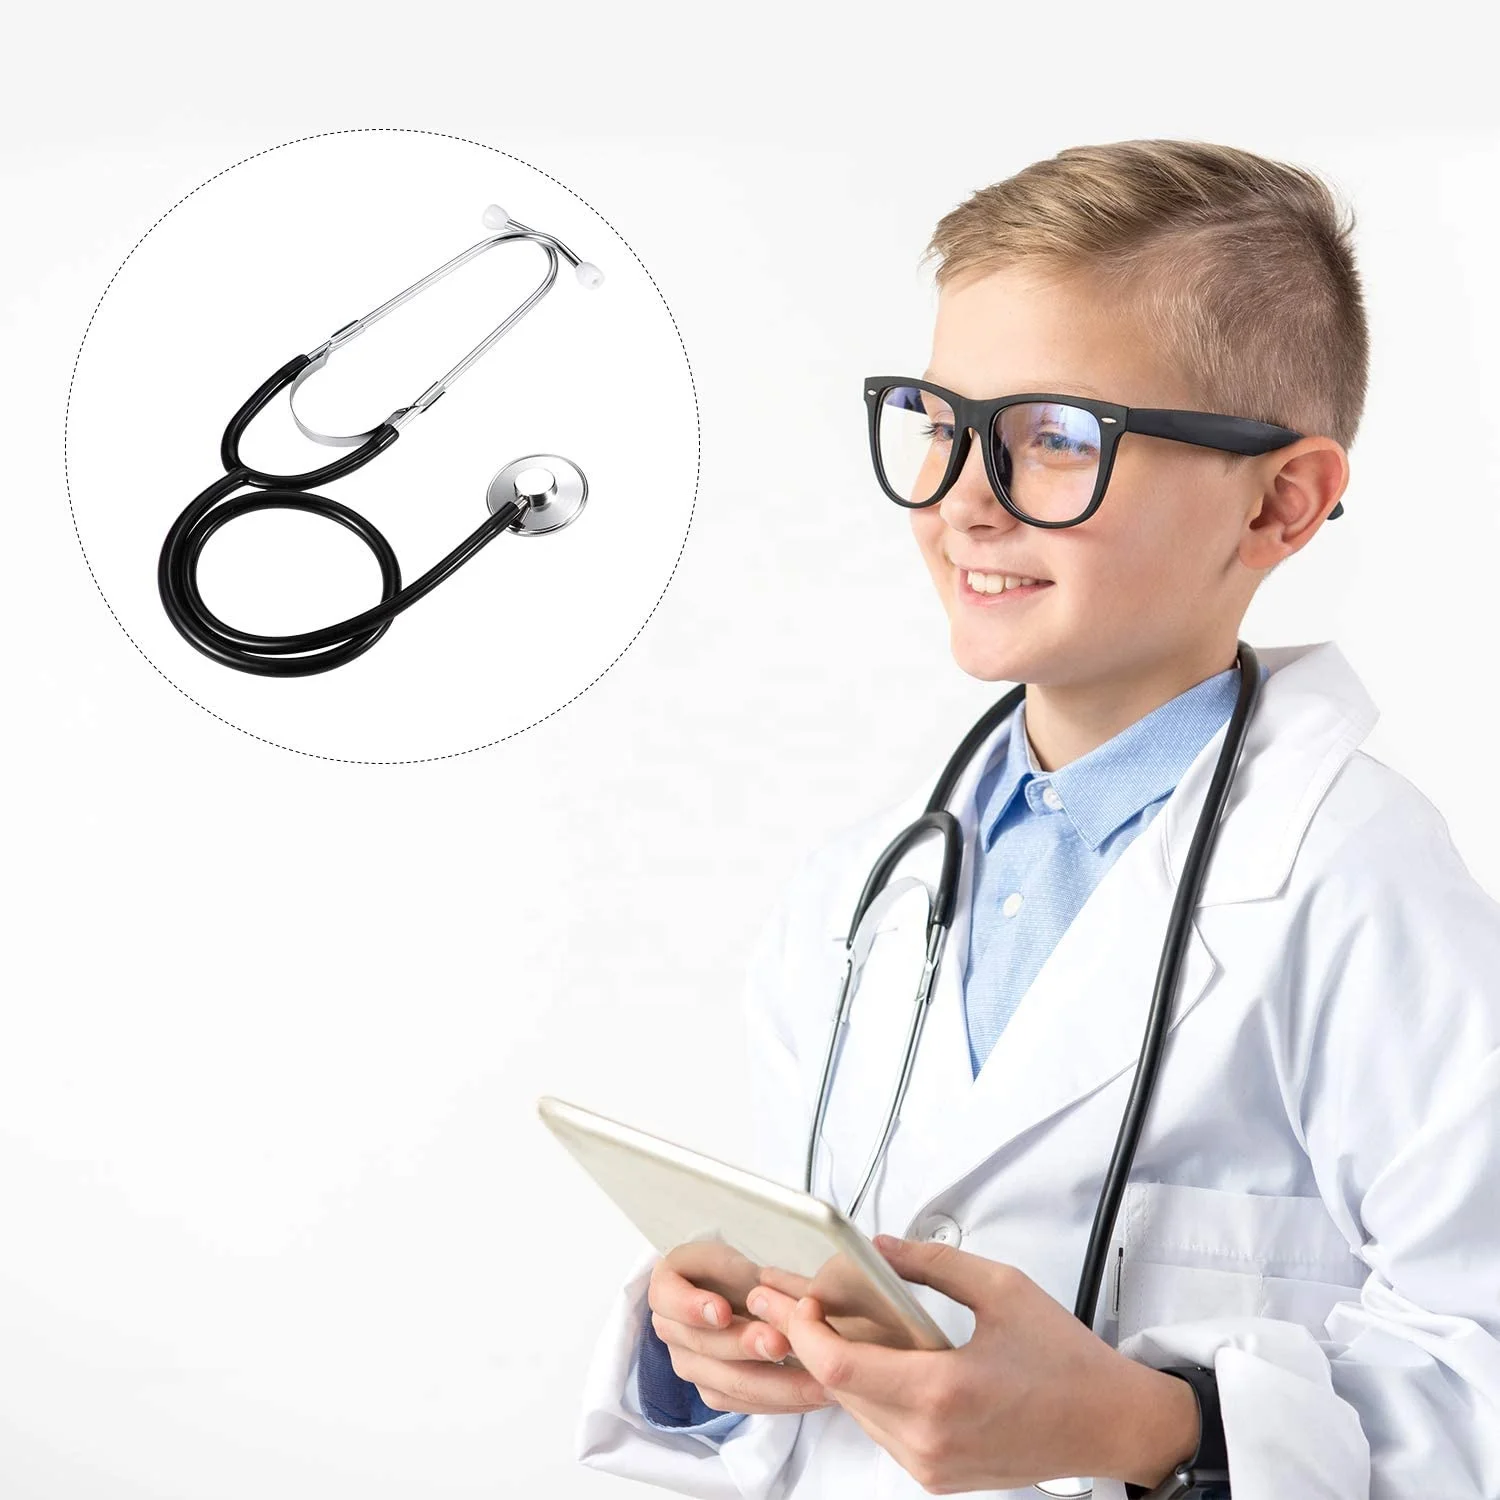 
Educational toy working stethoscope doctor toys for children cosplay 